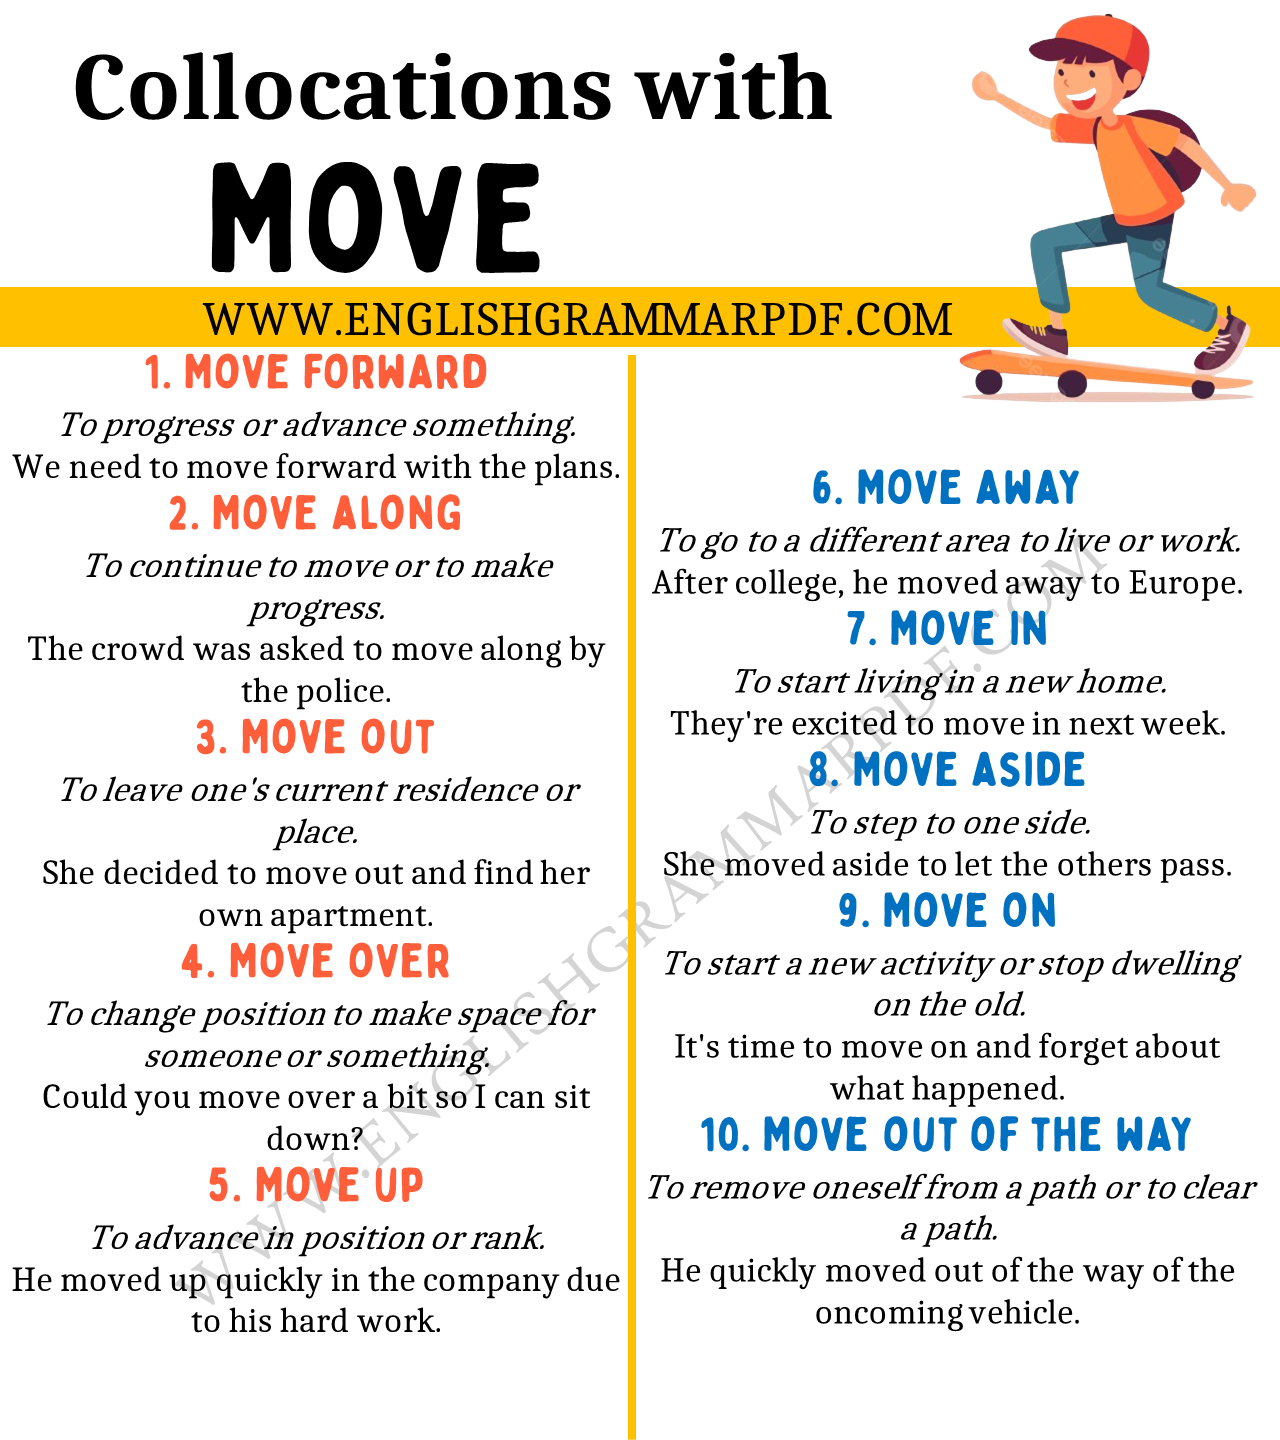 Collocations with “Move”